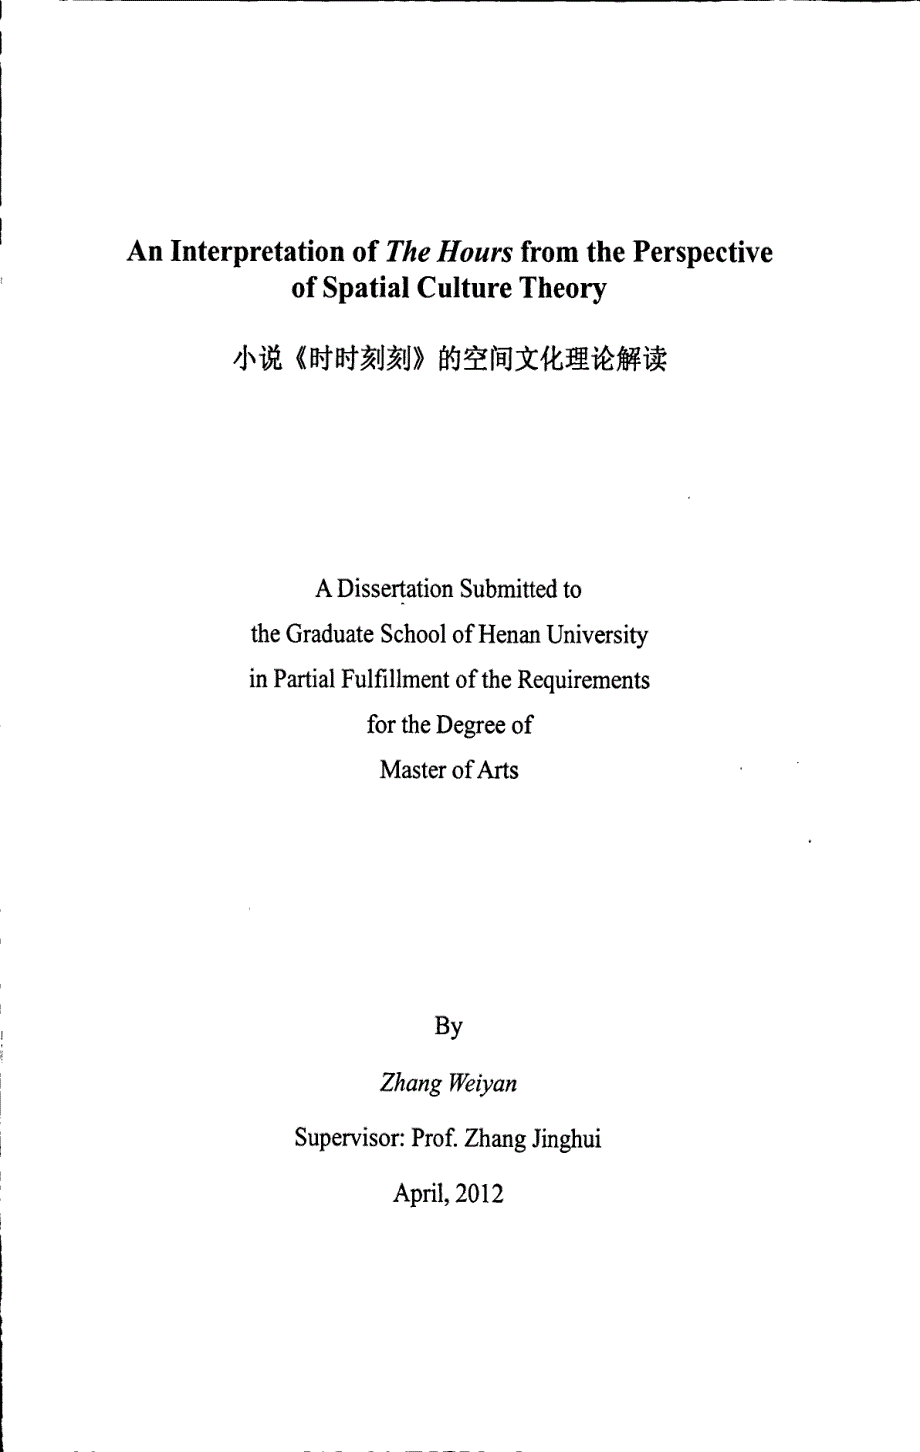 an interpretation of the hours from the perspective of spatial culture theory_第1页